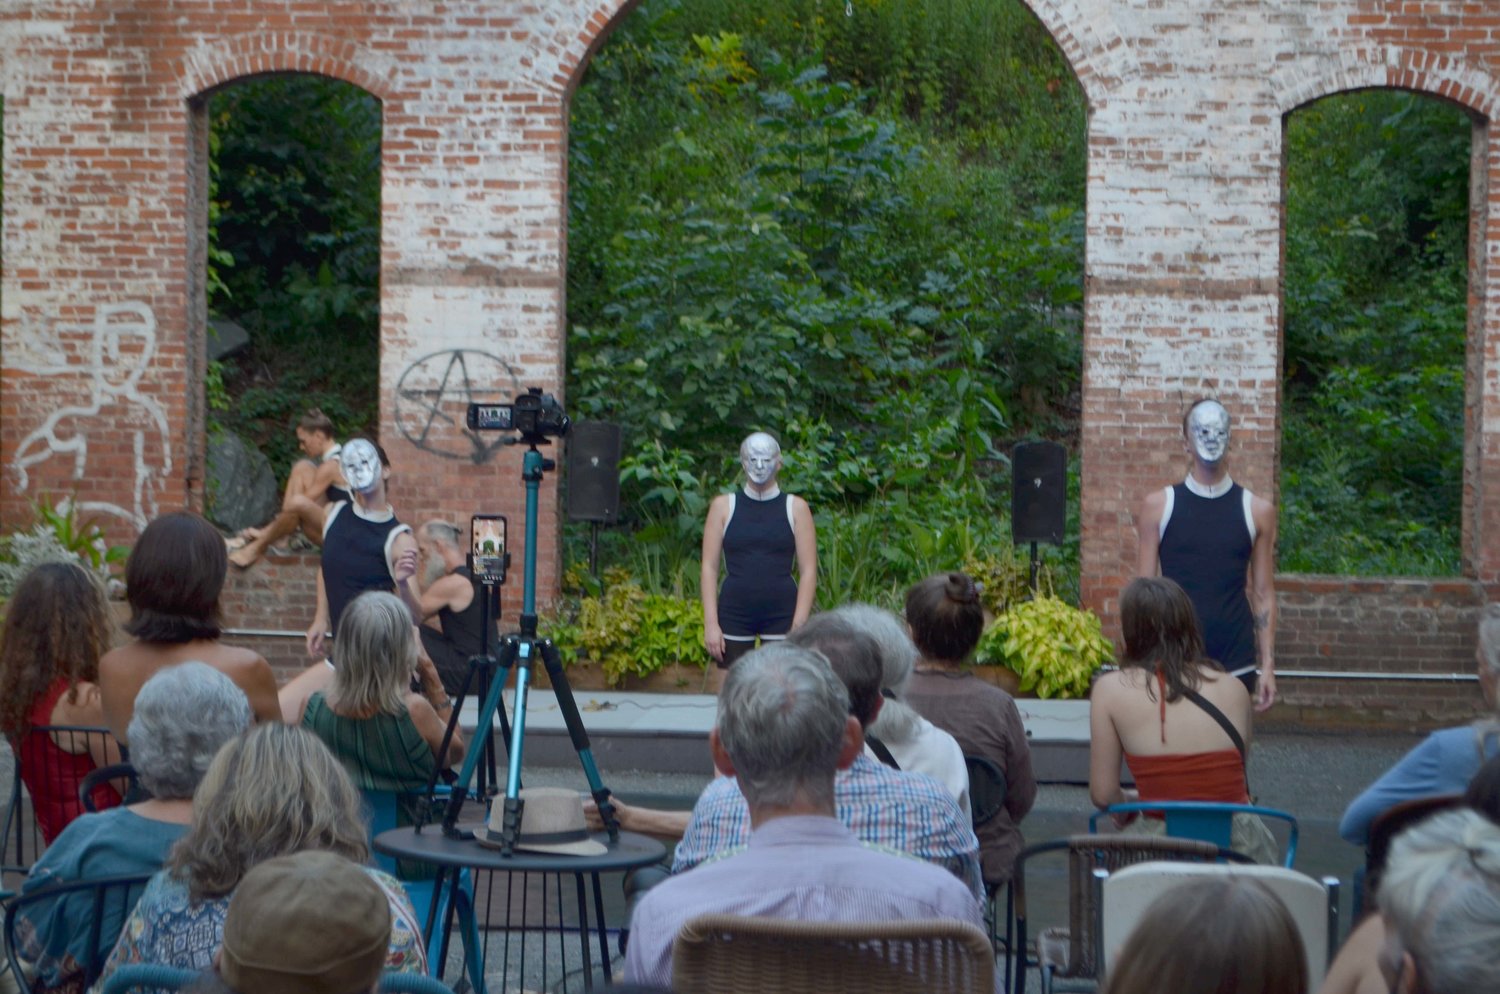 Dancers don masks for a phone-inspired number in "Technically Speaking."